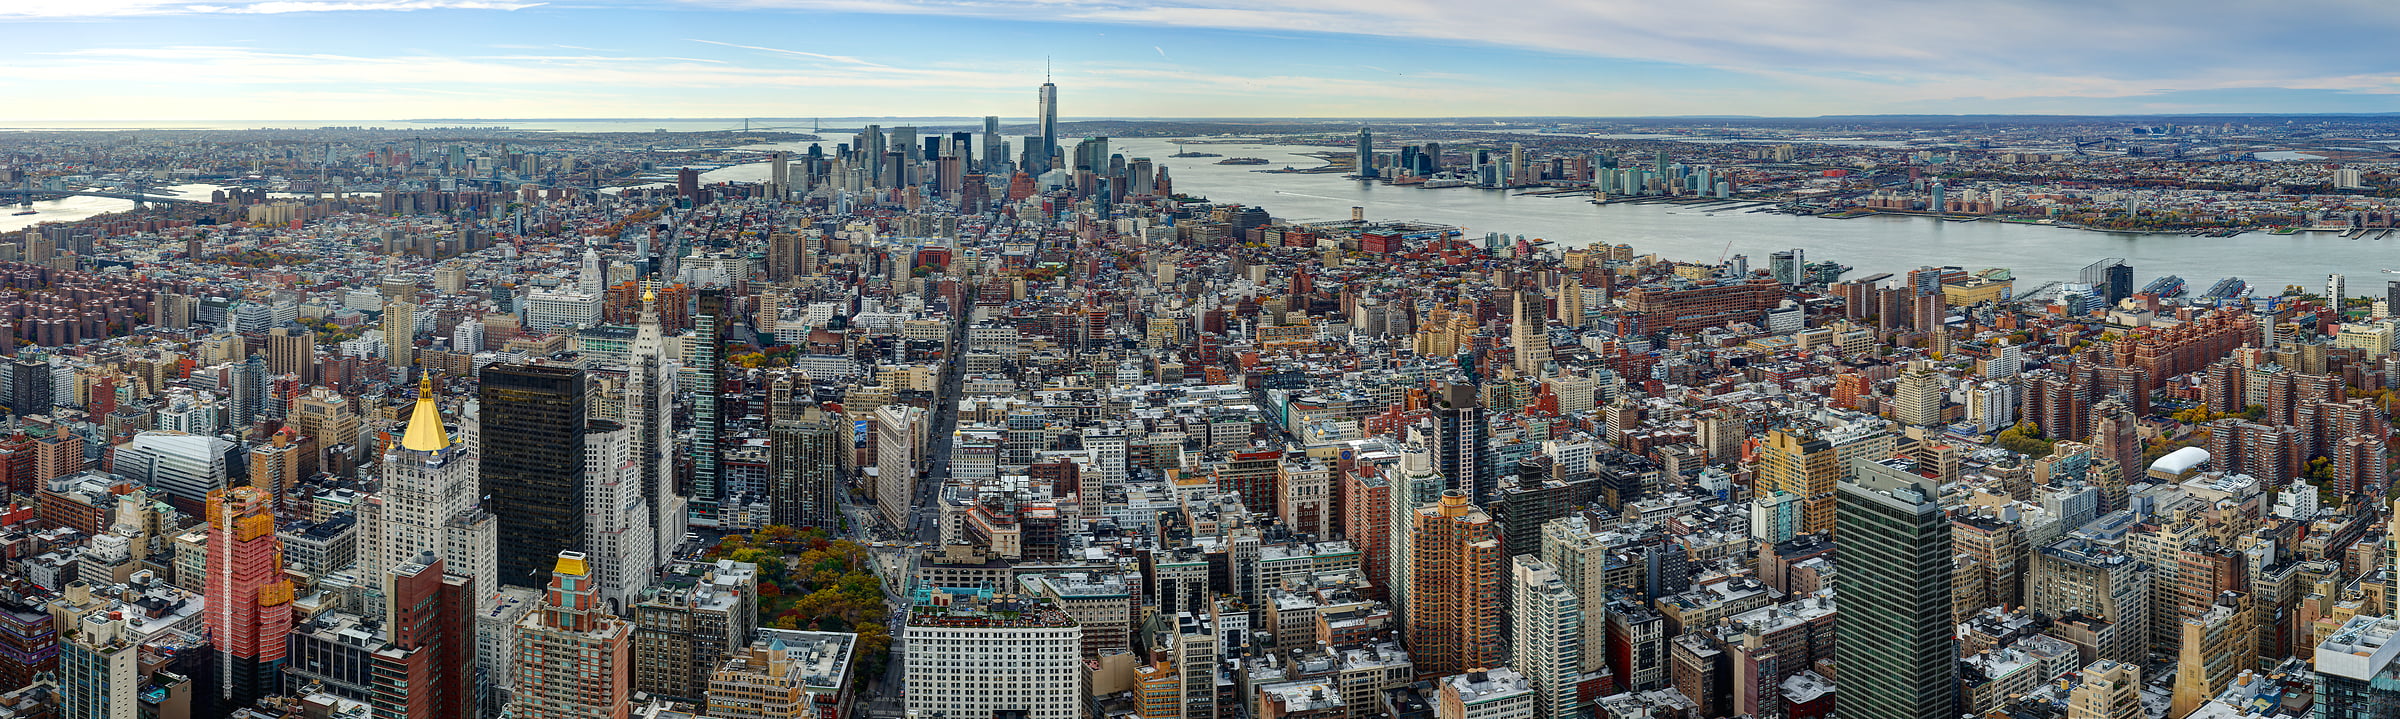 416 megapixels! A very high resolution, large-format VAST photo print of Manhattan; aerial photograph created by Tim Lo Monaco at the Empire State Building in Manhattan, New York City, New York